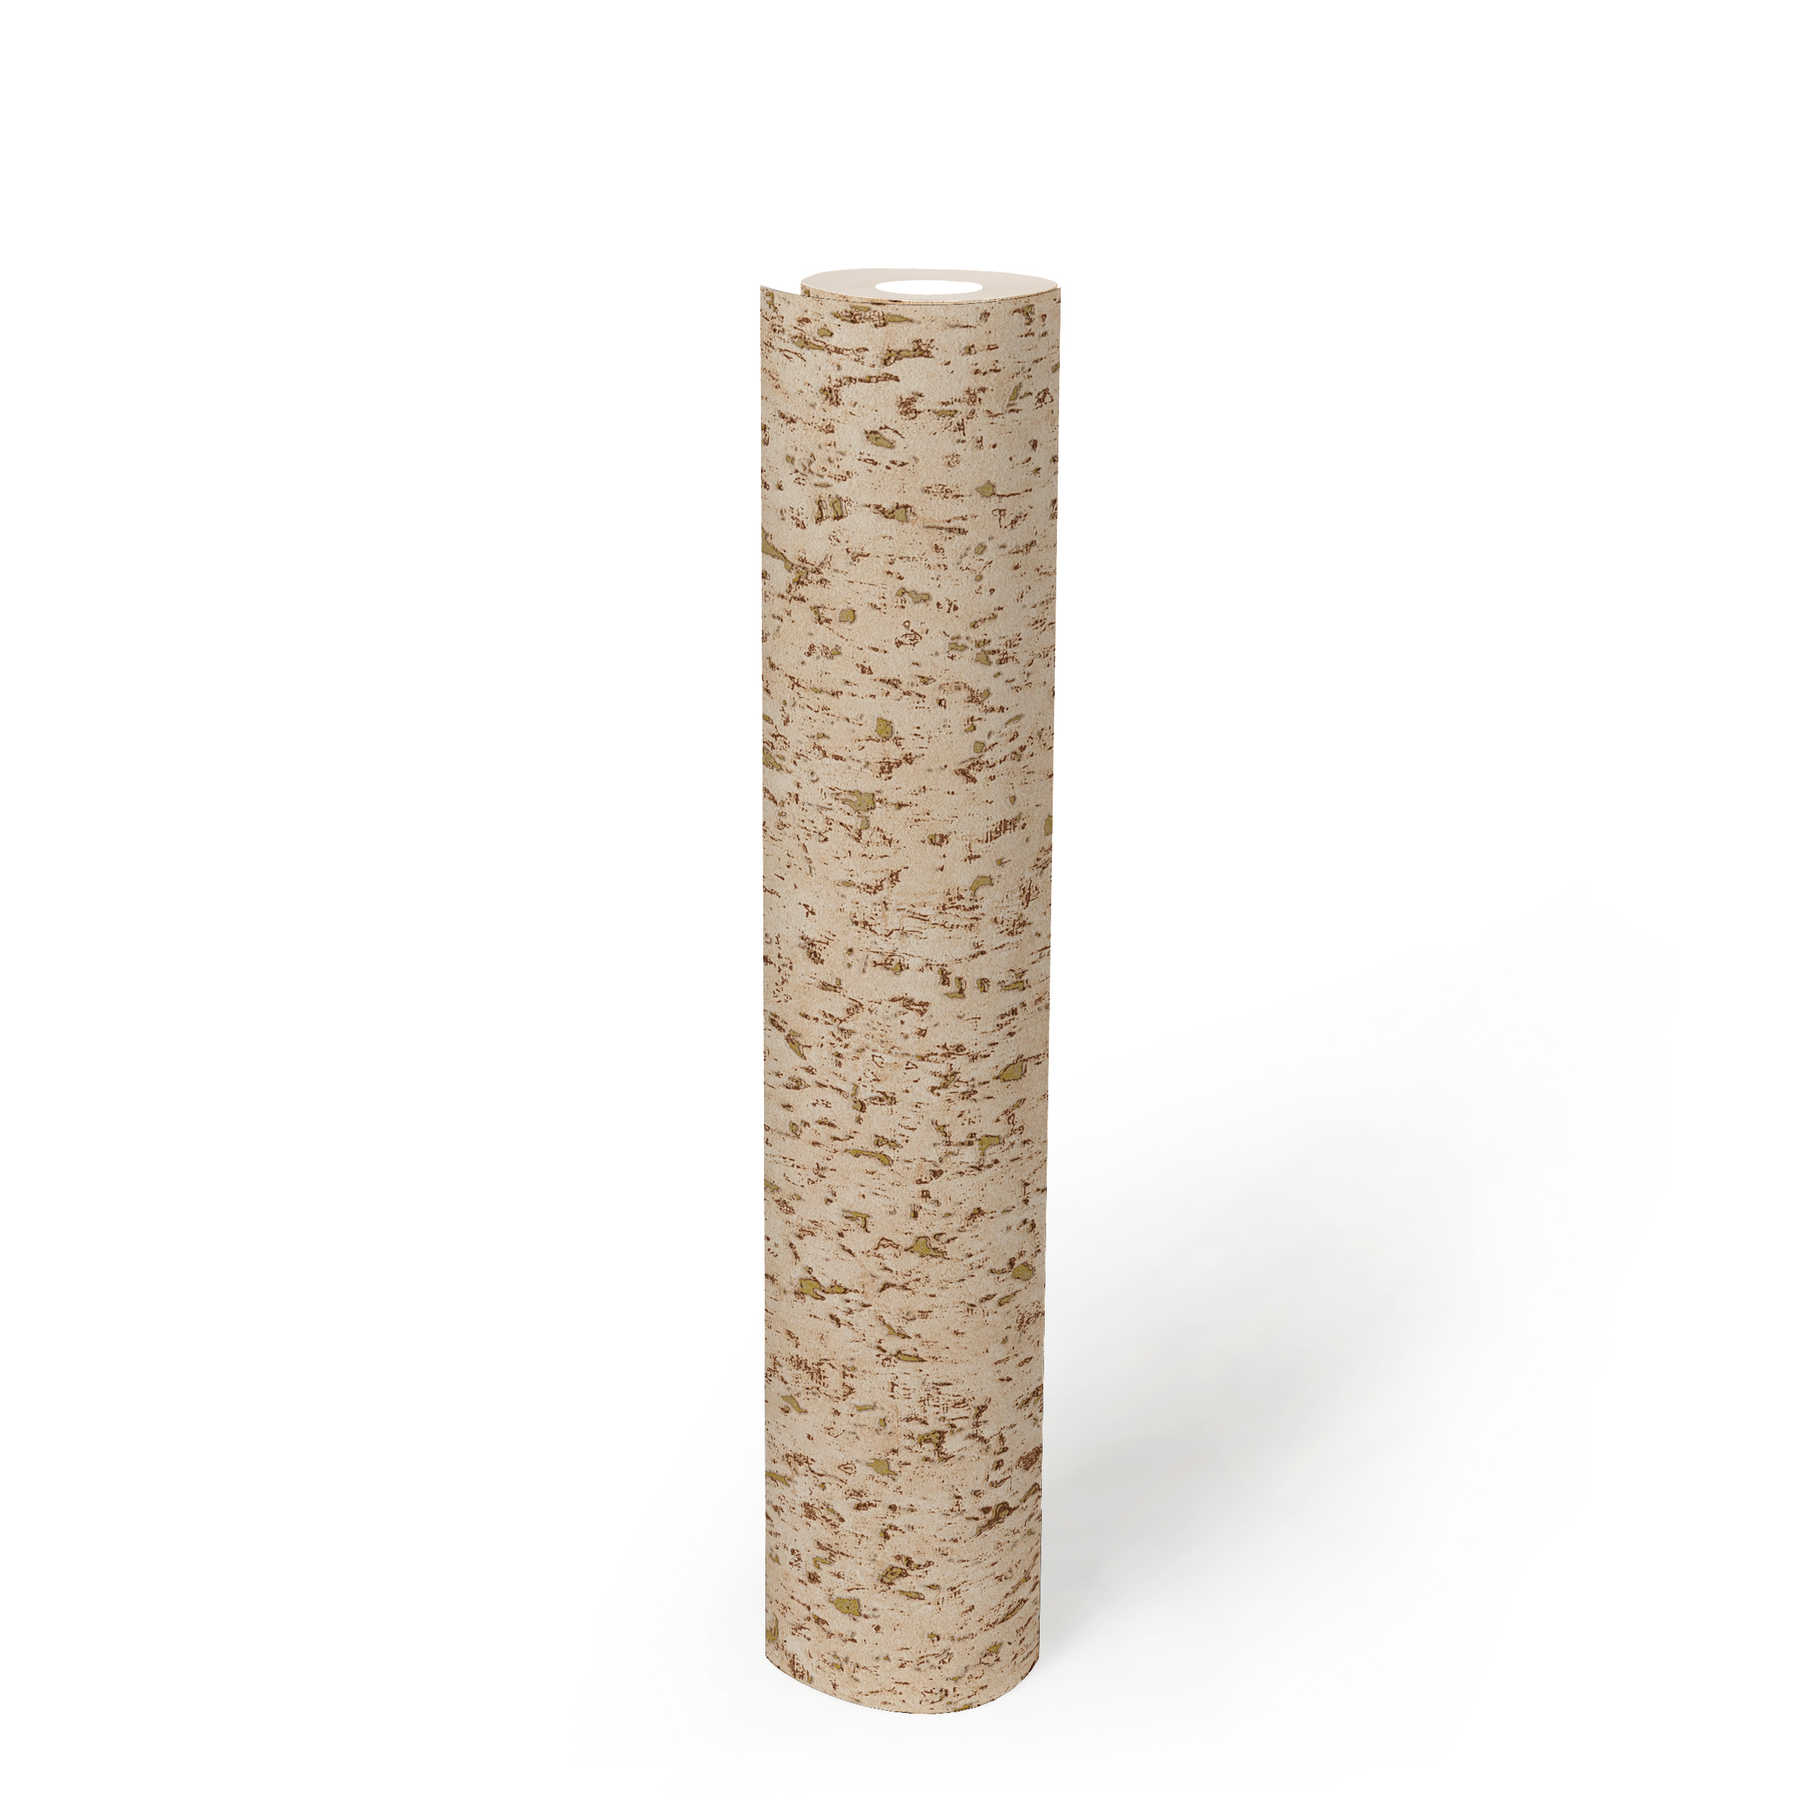             Wallpaper cork structure with metallic accent - brown, cream, gold
        